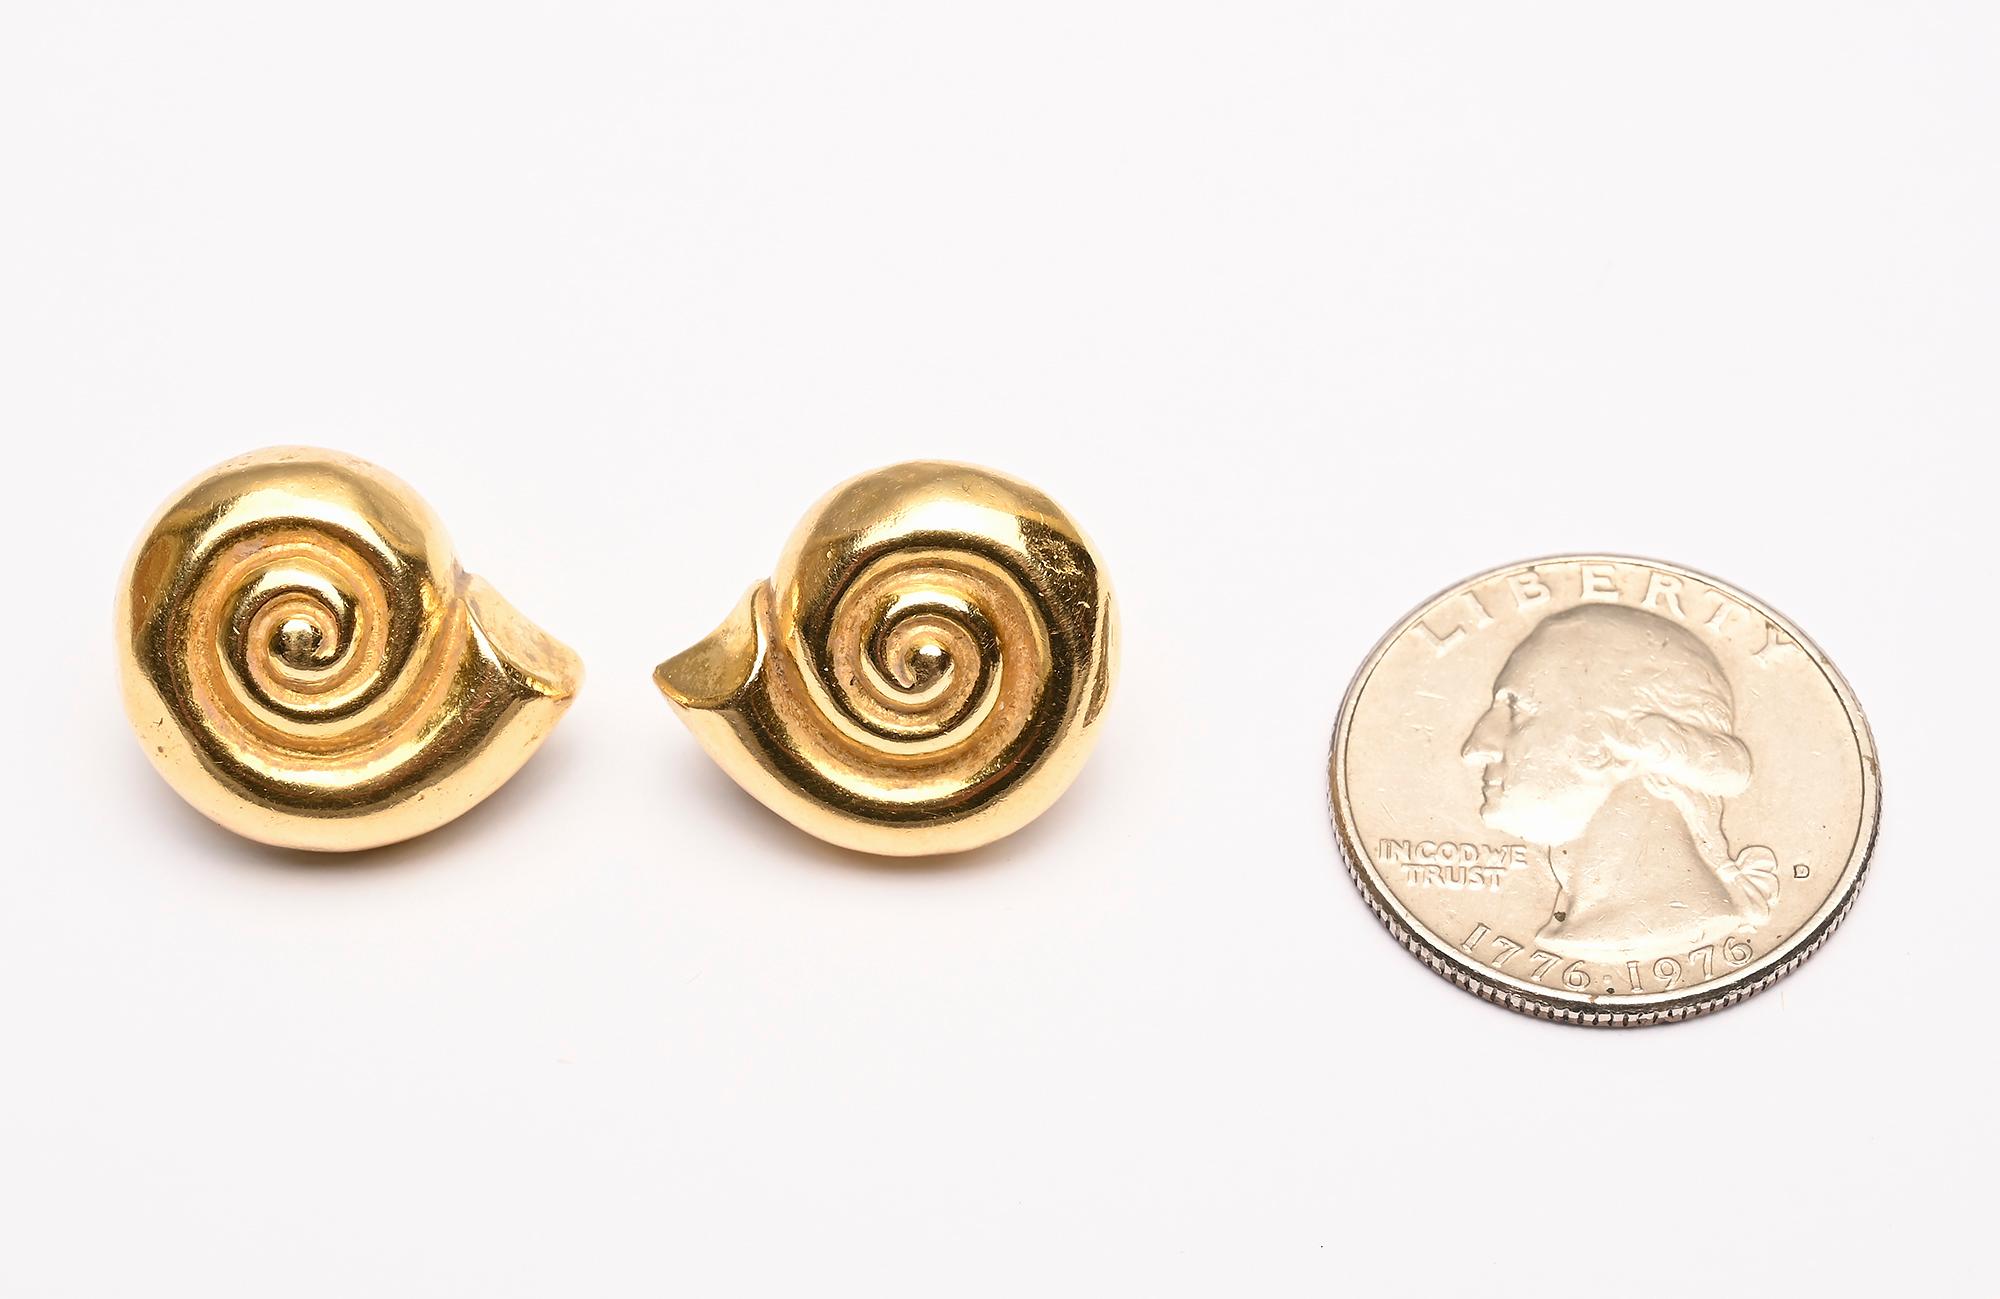 Coiled gold earrings by famed Greek designer, Ilias Lalaounis. The earrings have a three dimensional spiral. Clip backs can be converted to posts.
Casual enough to be worn all day yet making enough of a statement for evening.